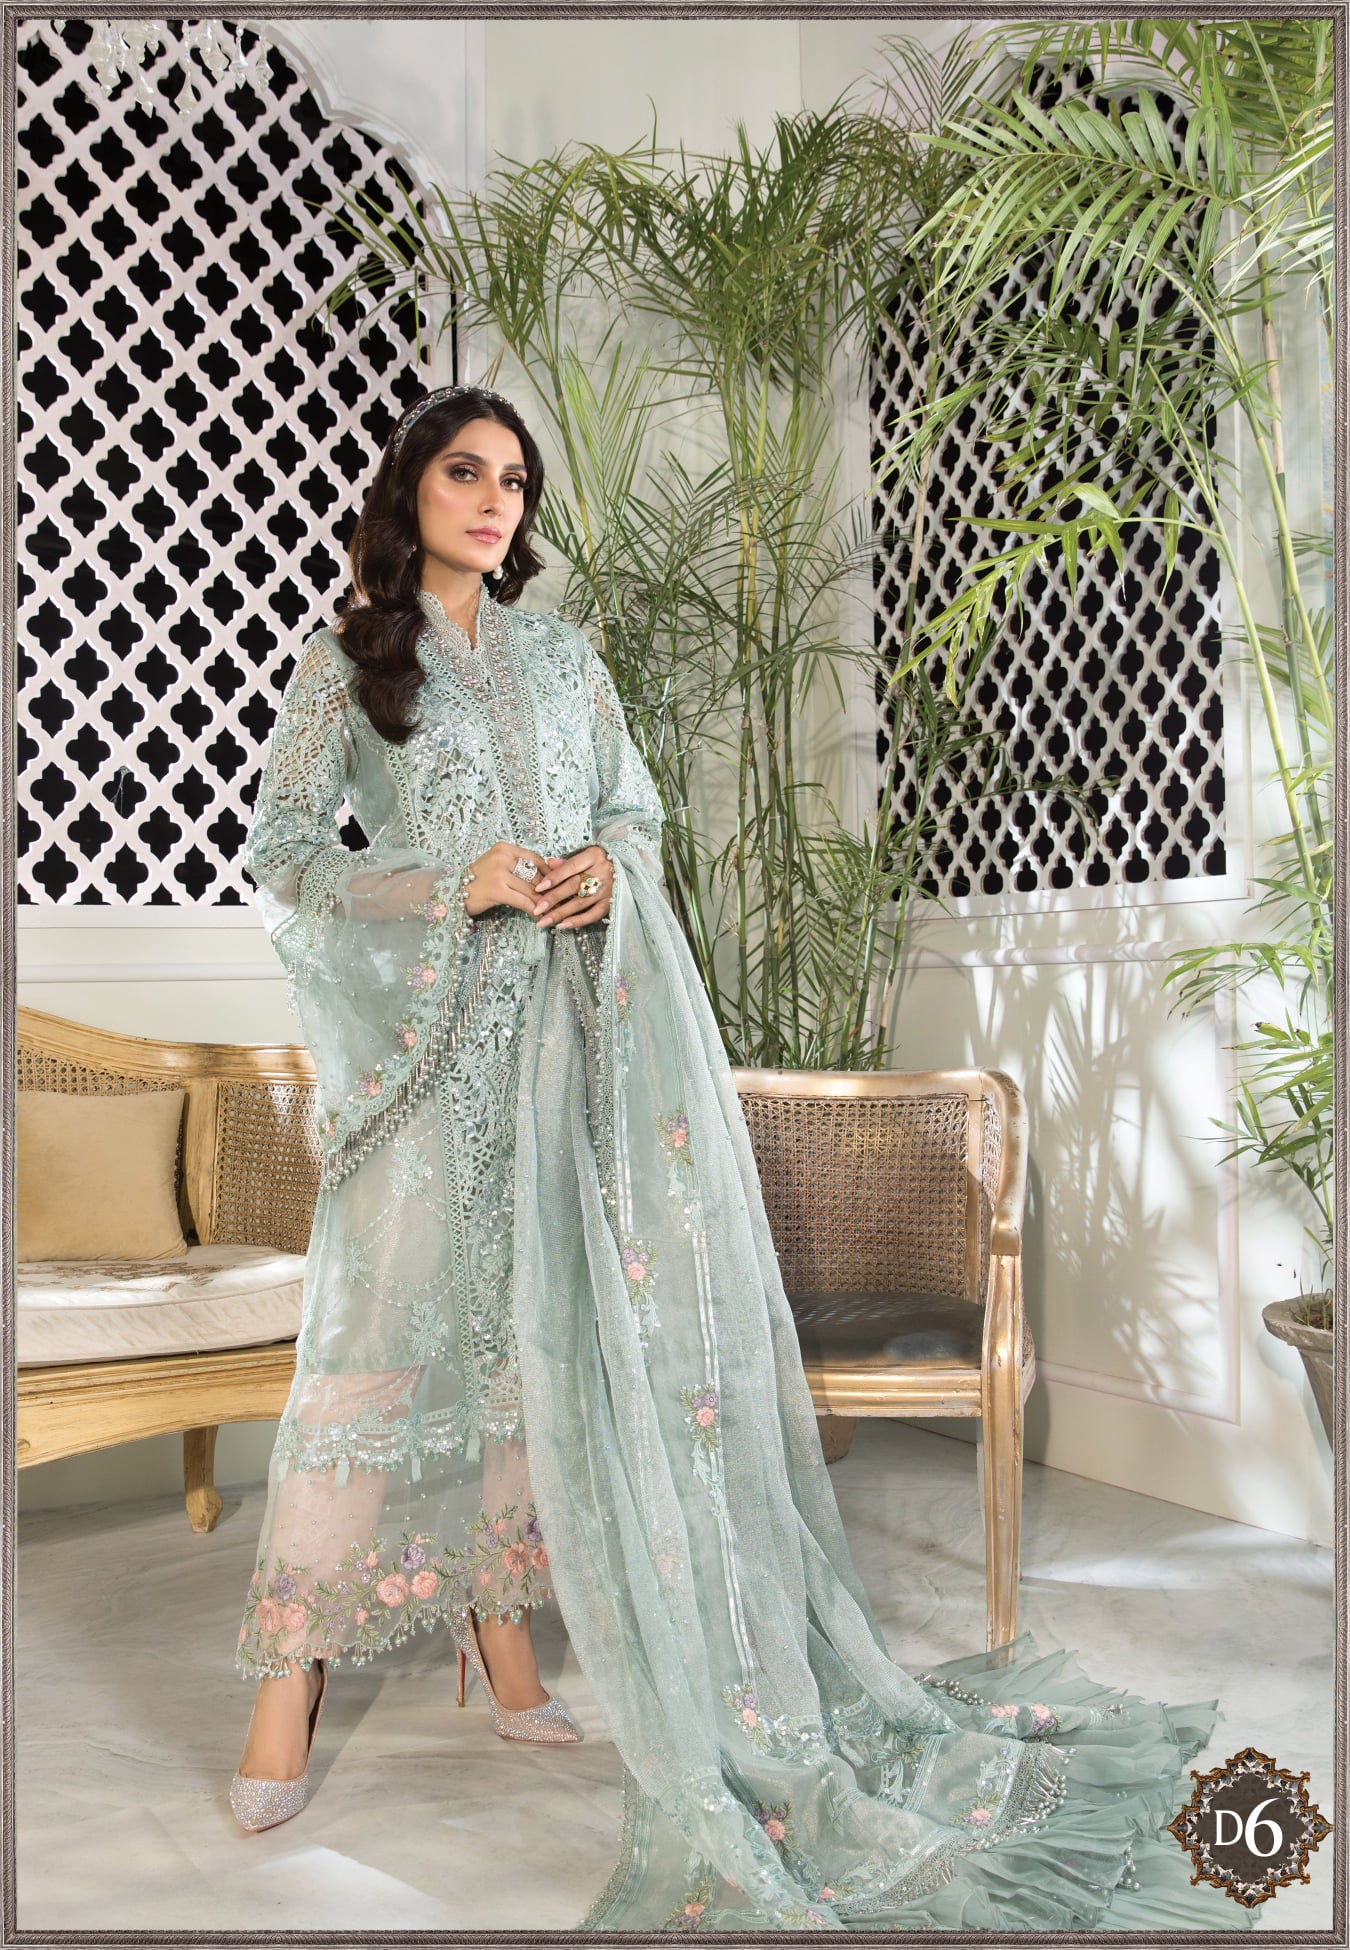 Design D6- Mbroidered Unstitched Heritage Edition’21 - Heer Rang